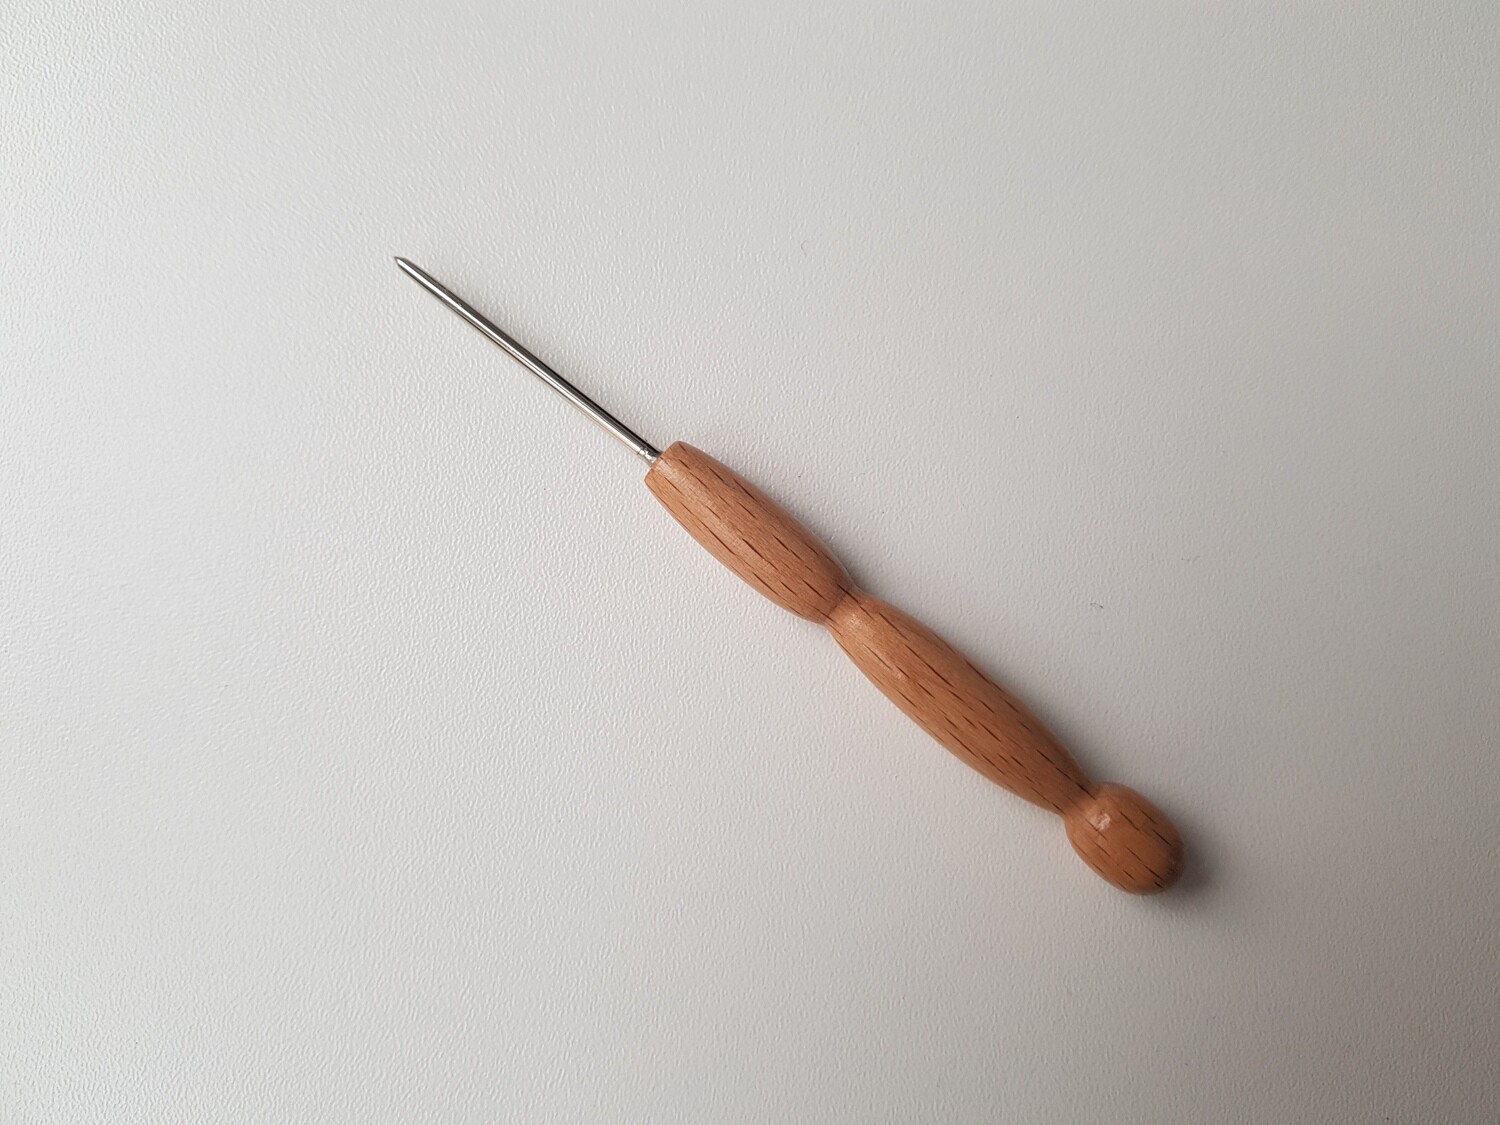 A Tool Used to Make Picots Consistent / Picot Gauge 2 mm